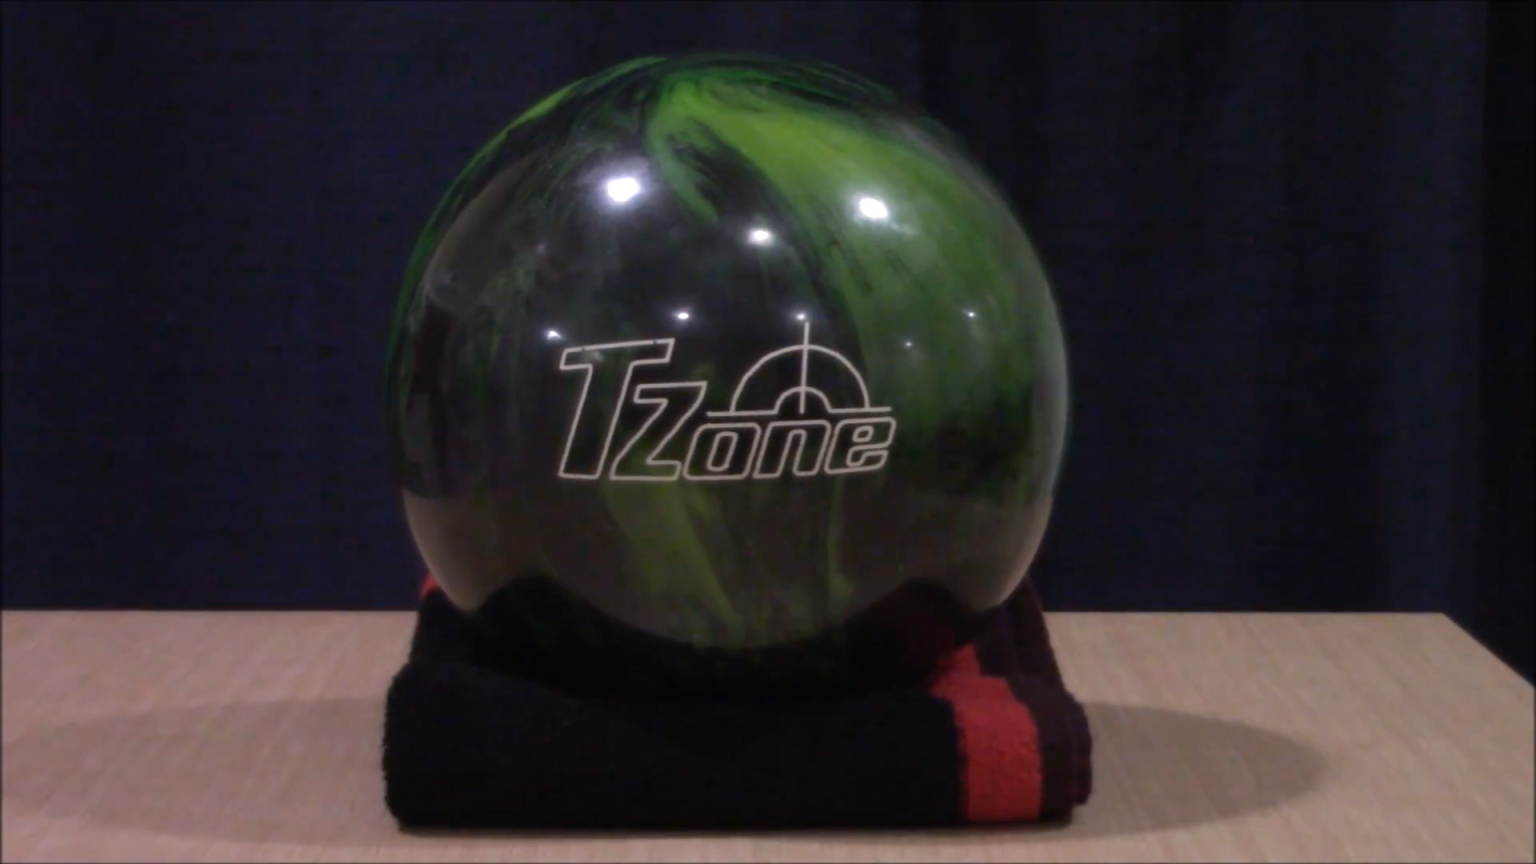 10 Best Bowling Ball For Straight Bowlers In 2024